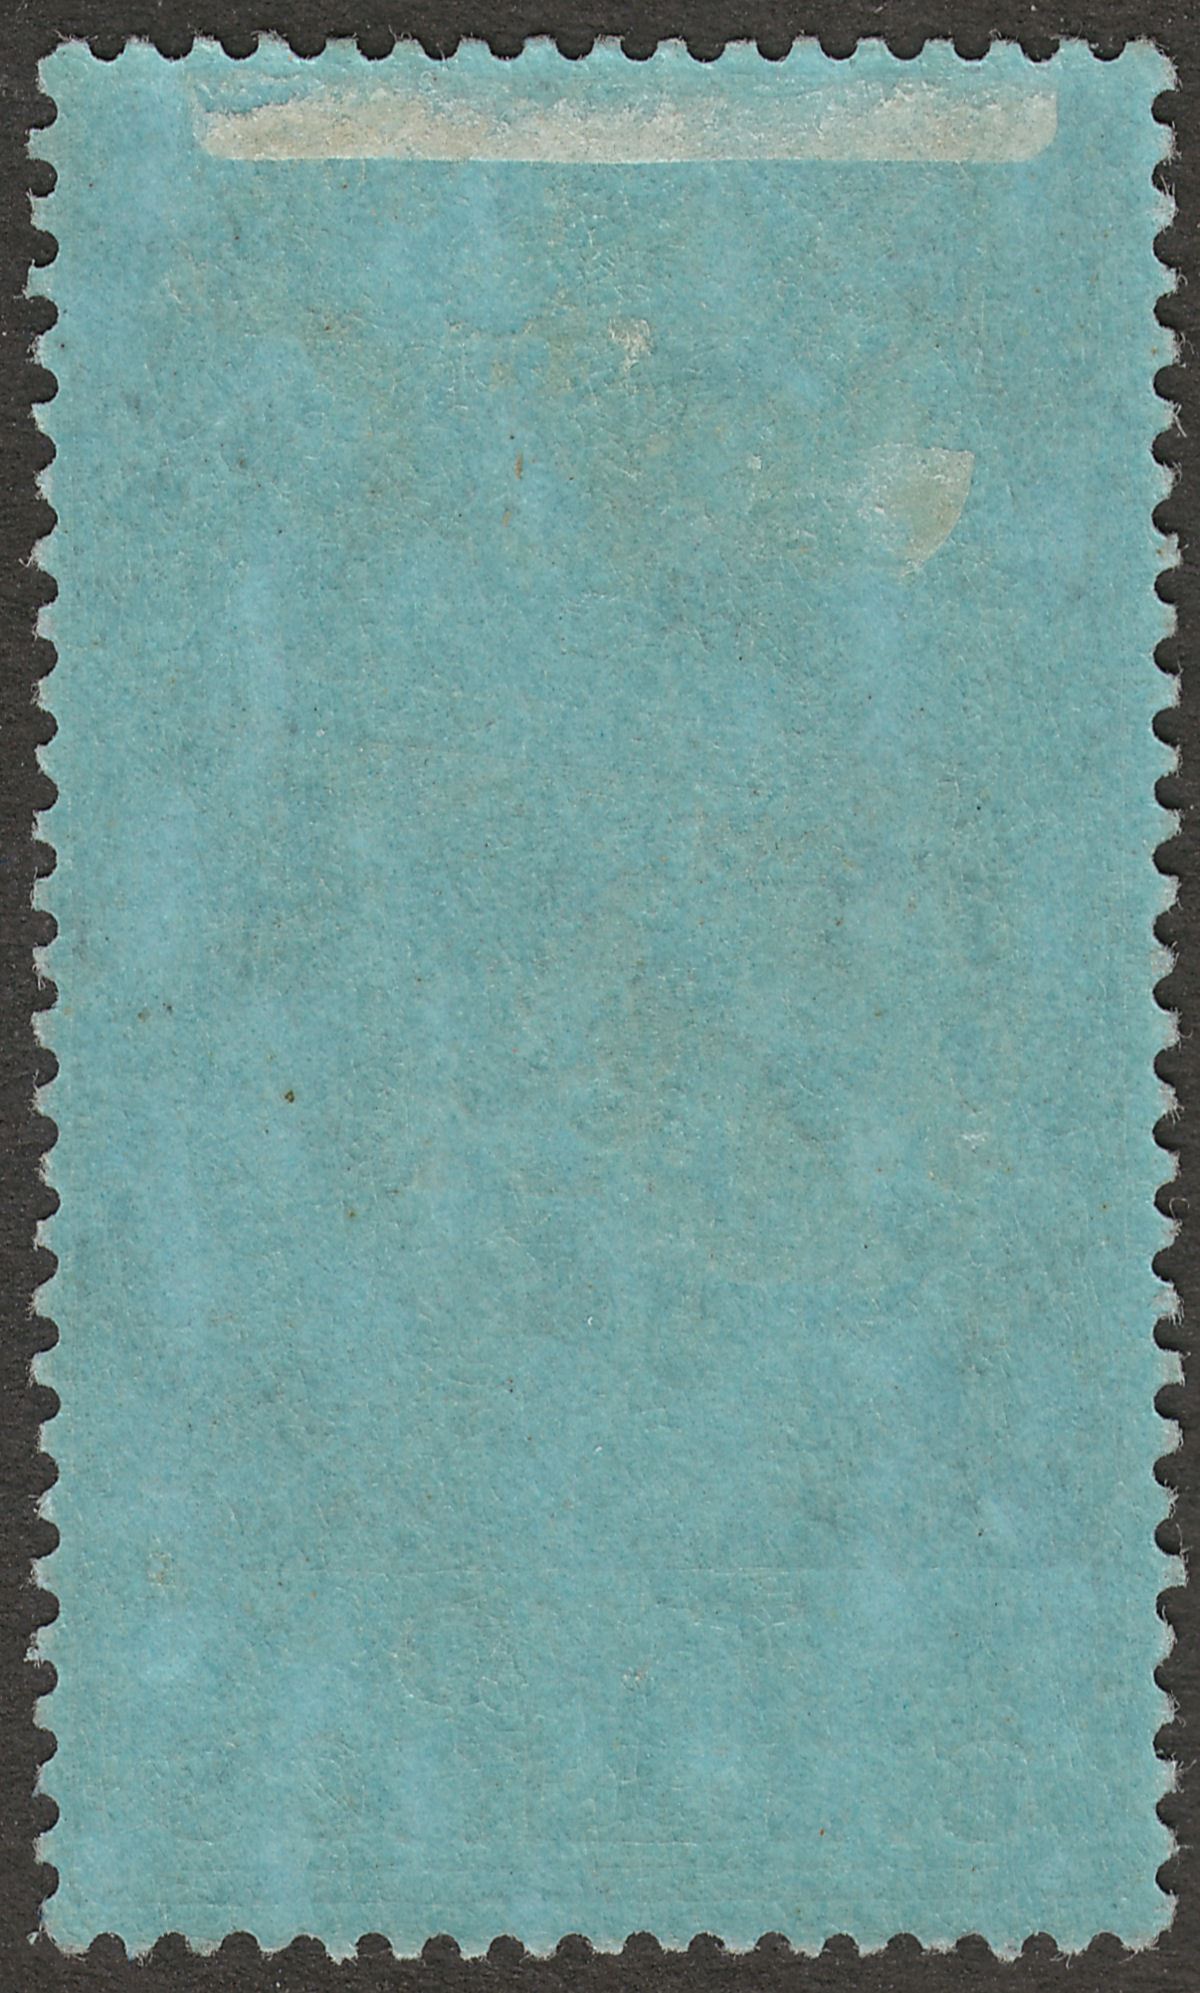 Gibraltar 1910 KEVII 2sh Purple and Bright Blue on Blue Mint SG72 cat £65